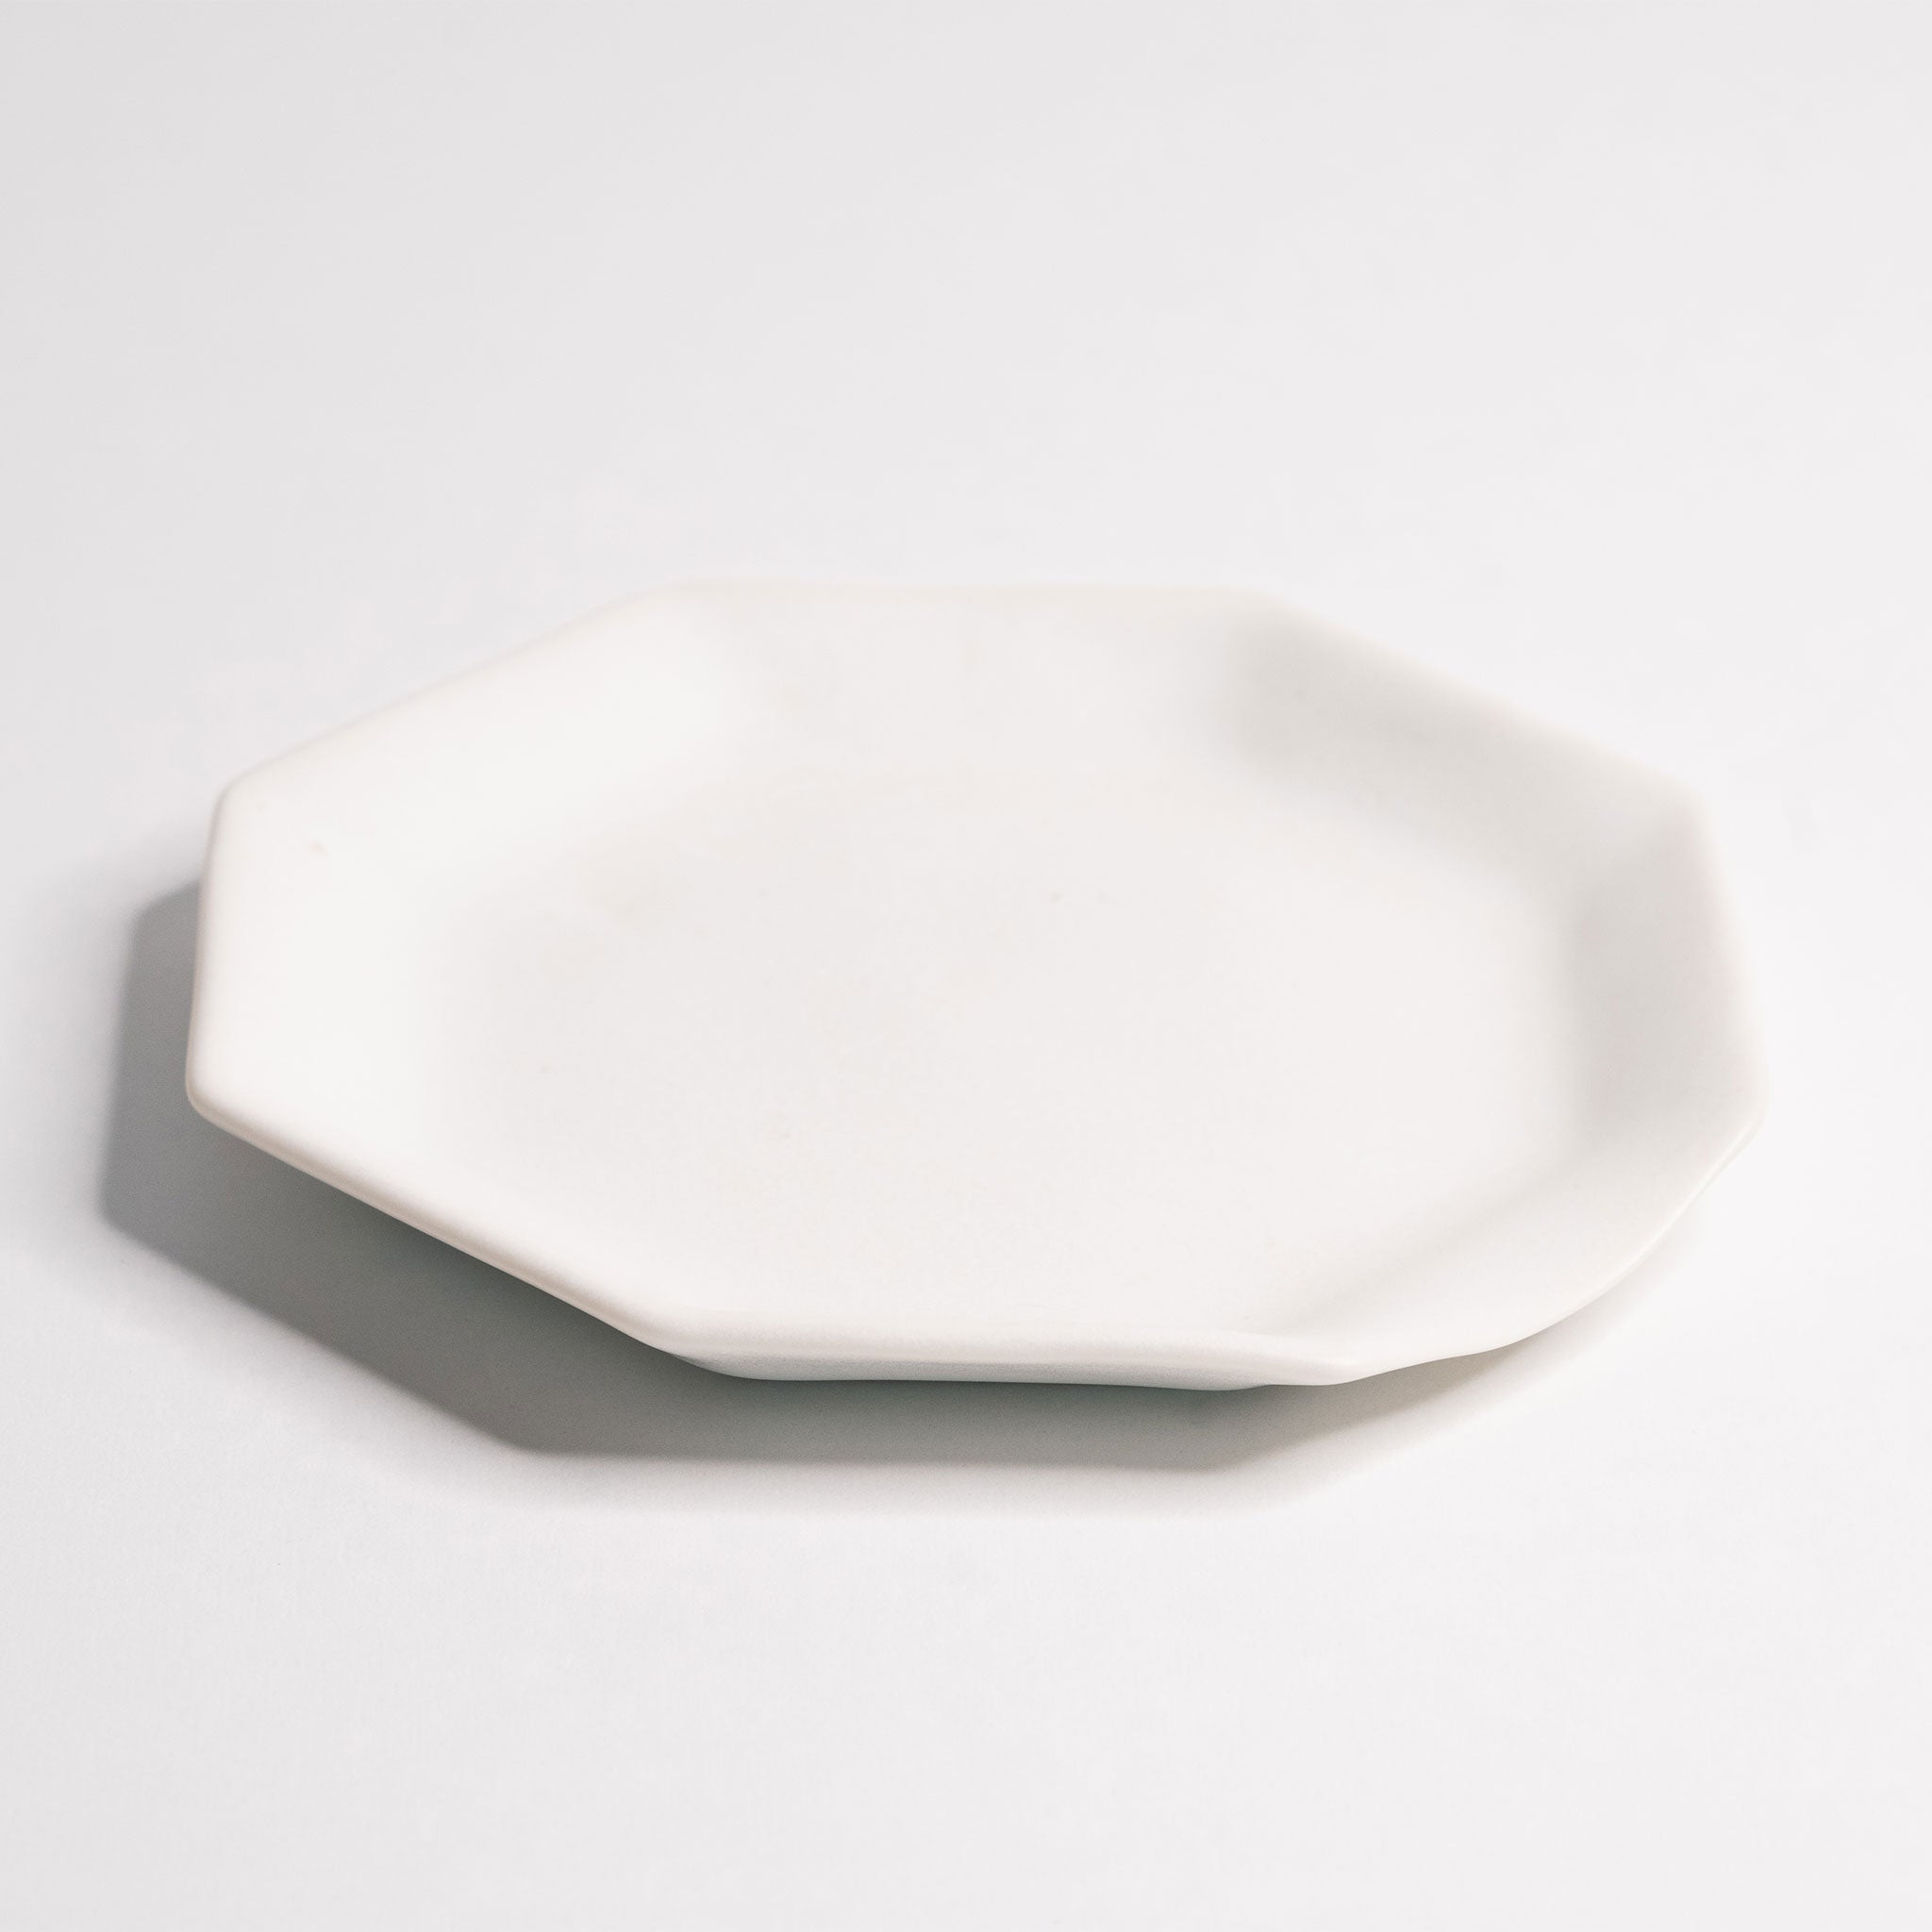 Handmade Porcelain Spoon Rest Rosemary Green The Bright Angle